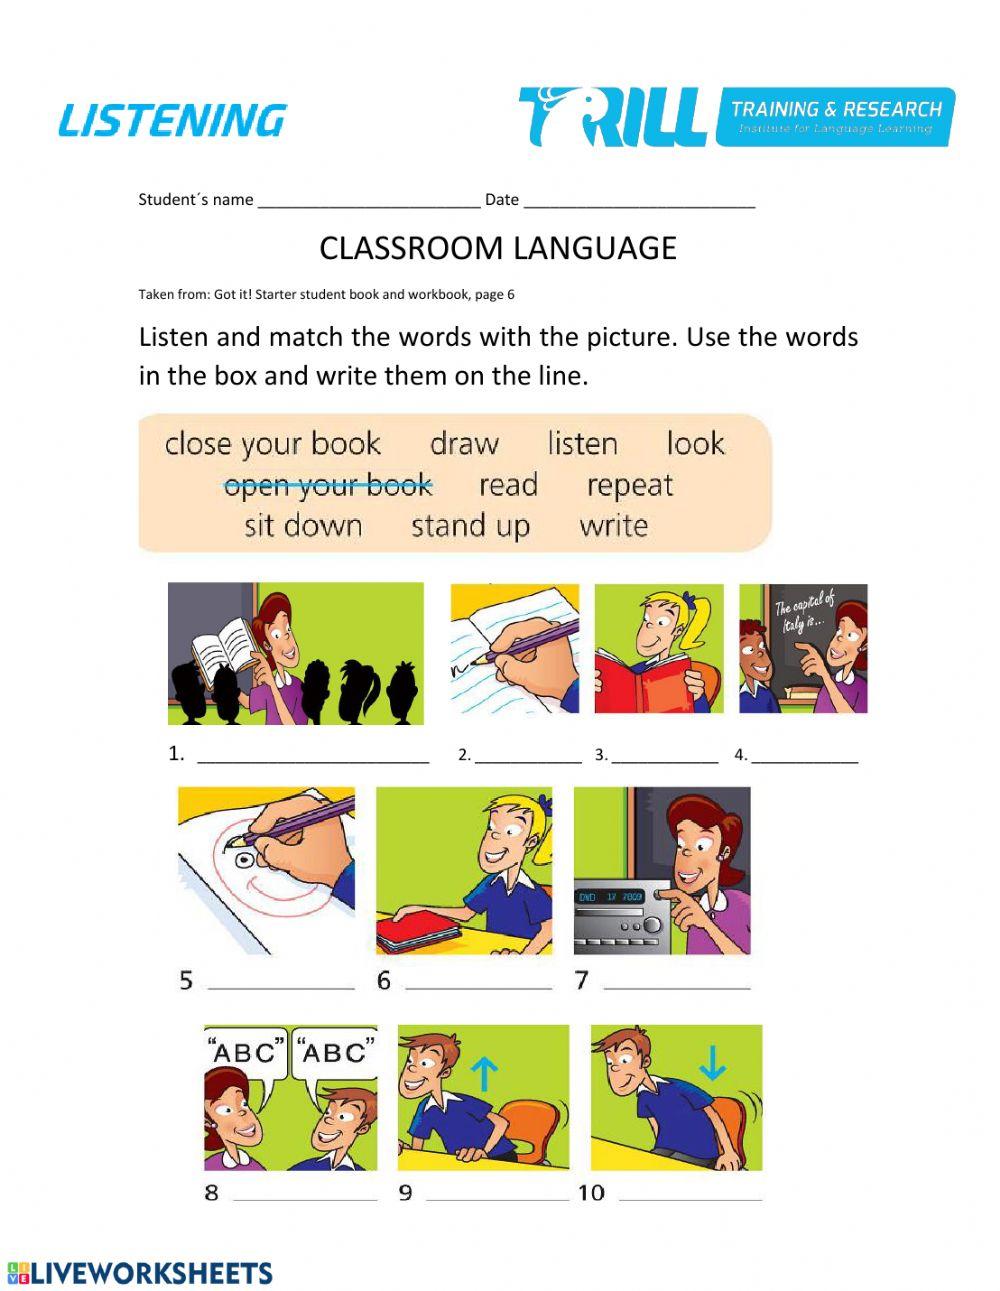 School objects and classroom language